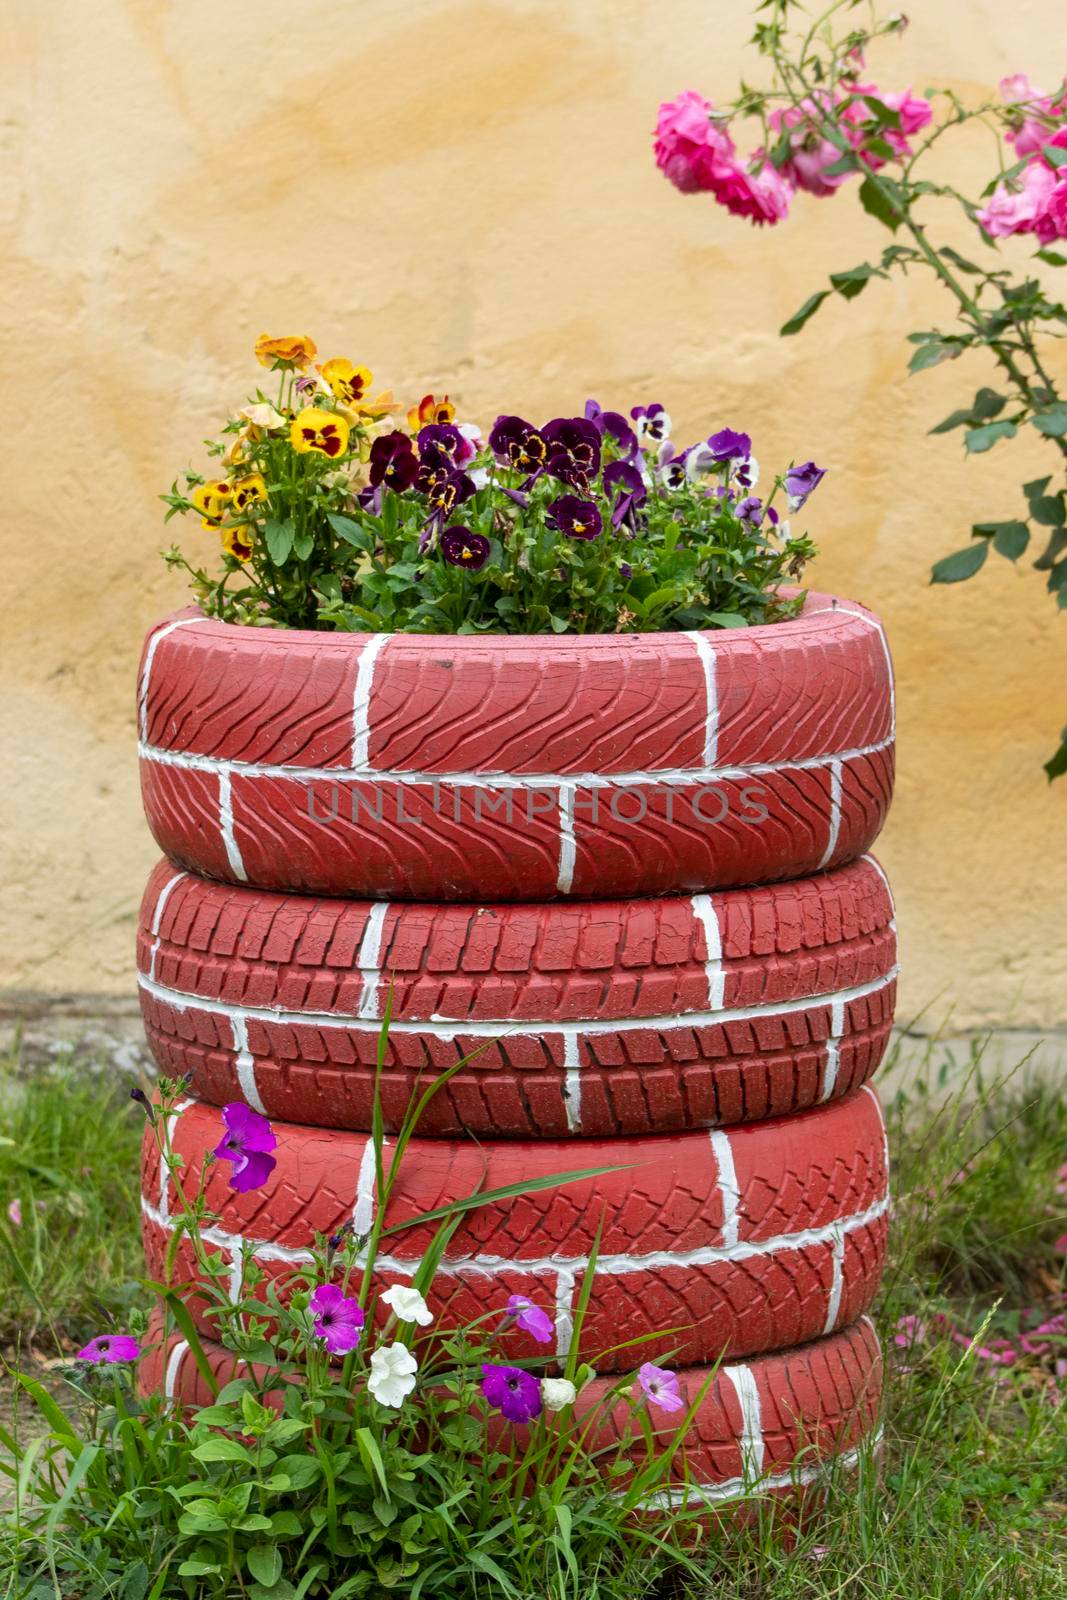 Spring flowers that are inside the tires